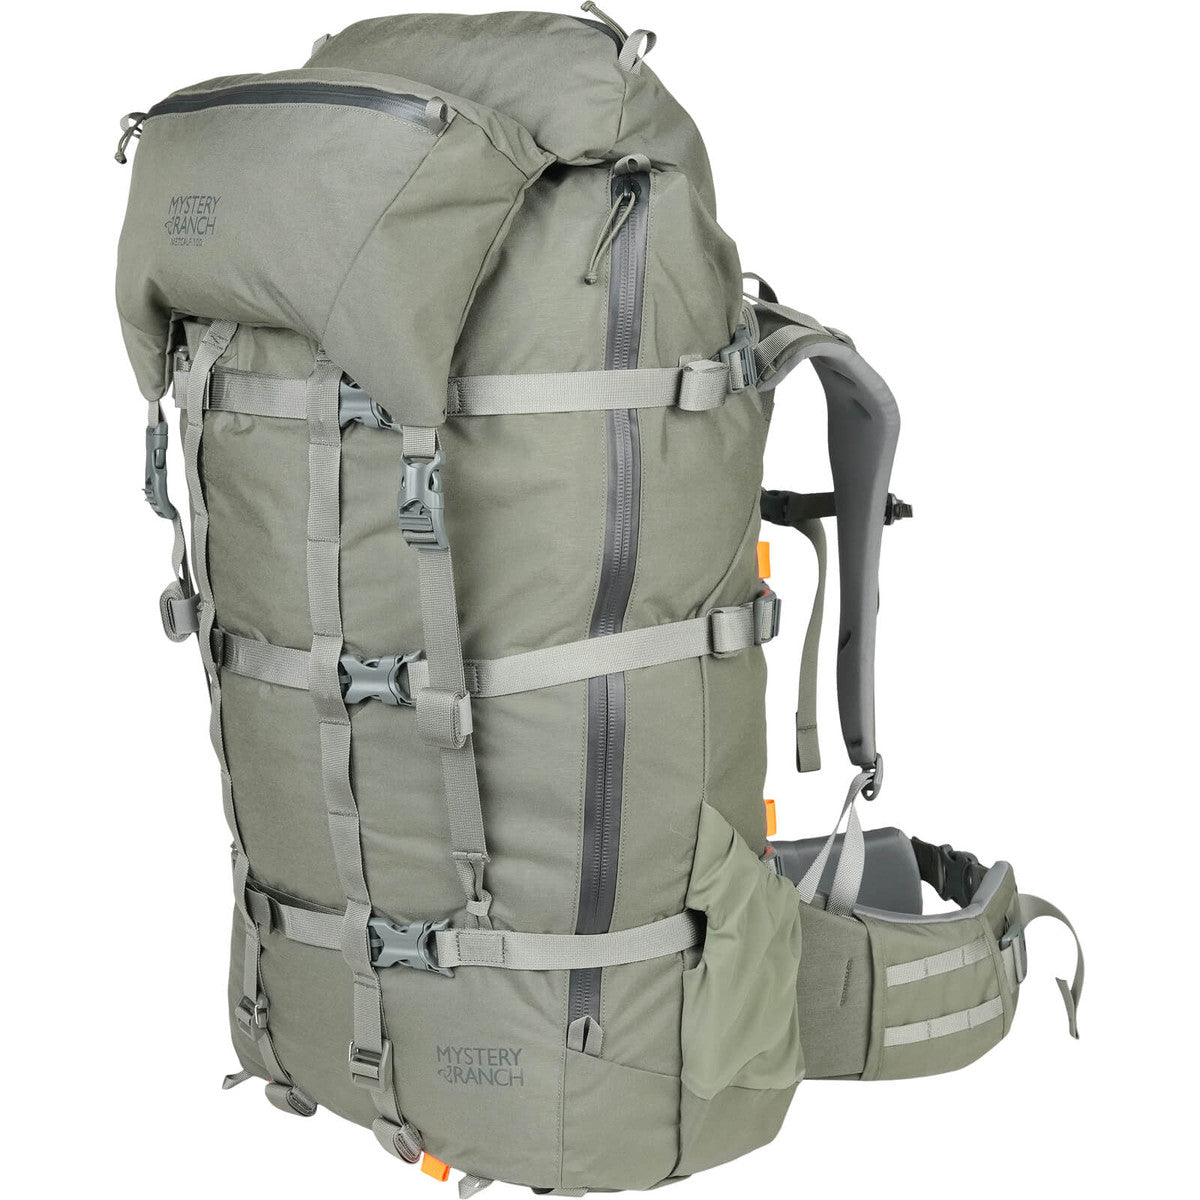 Mystery Ranch Metcalf 75 Hunting Pack Foliage